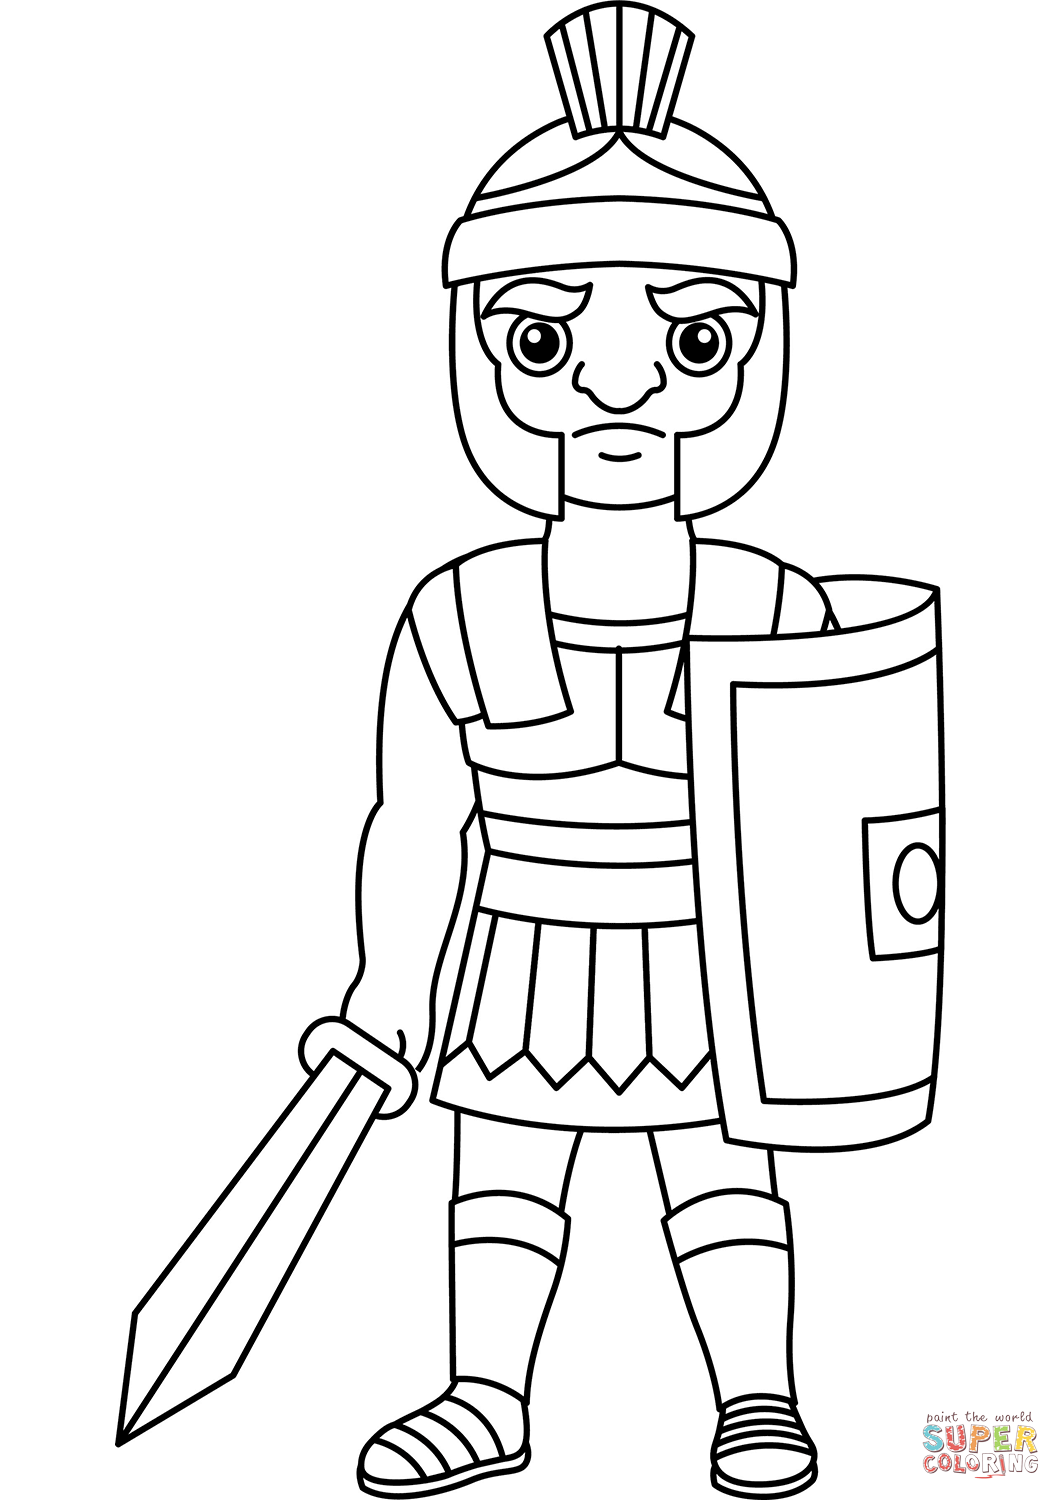 Cartoon roman soldier coloring page free printable coloring pages